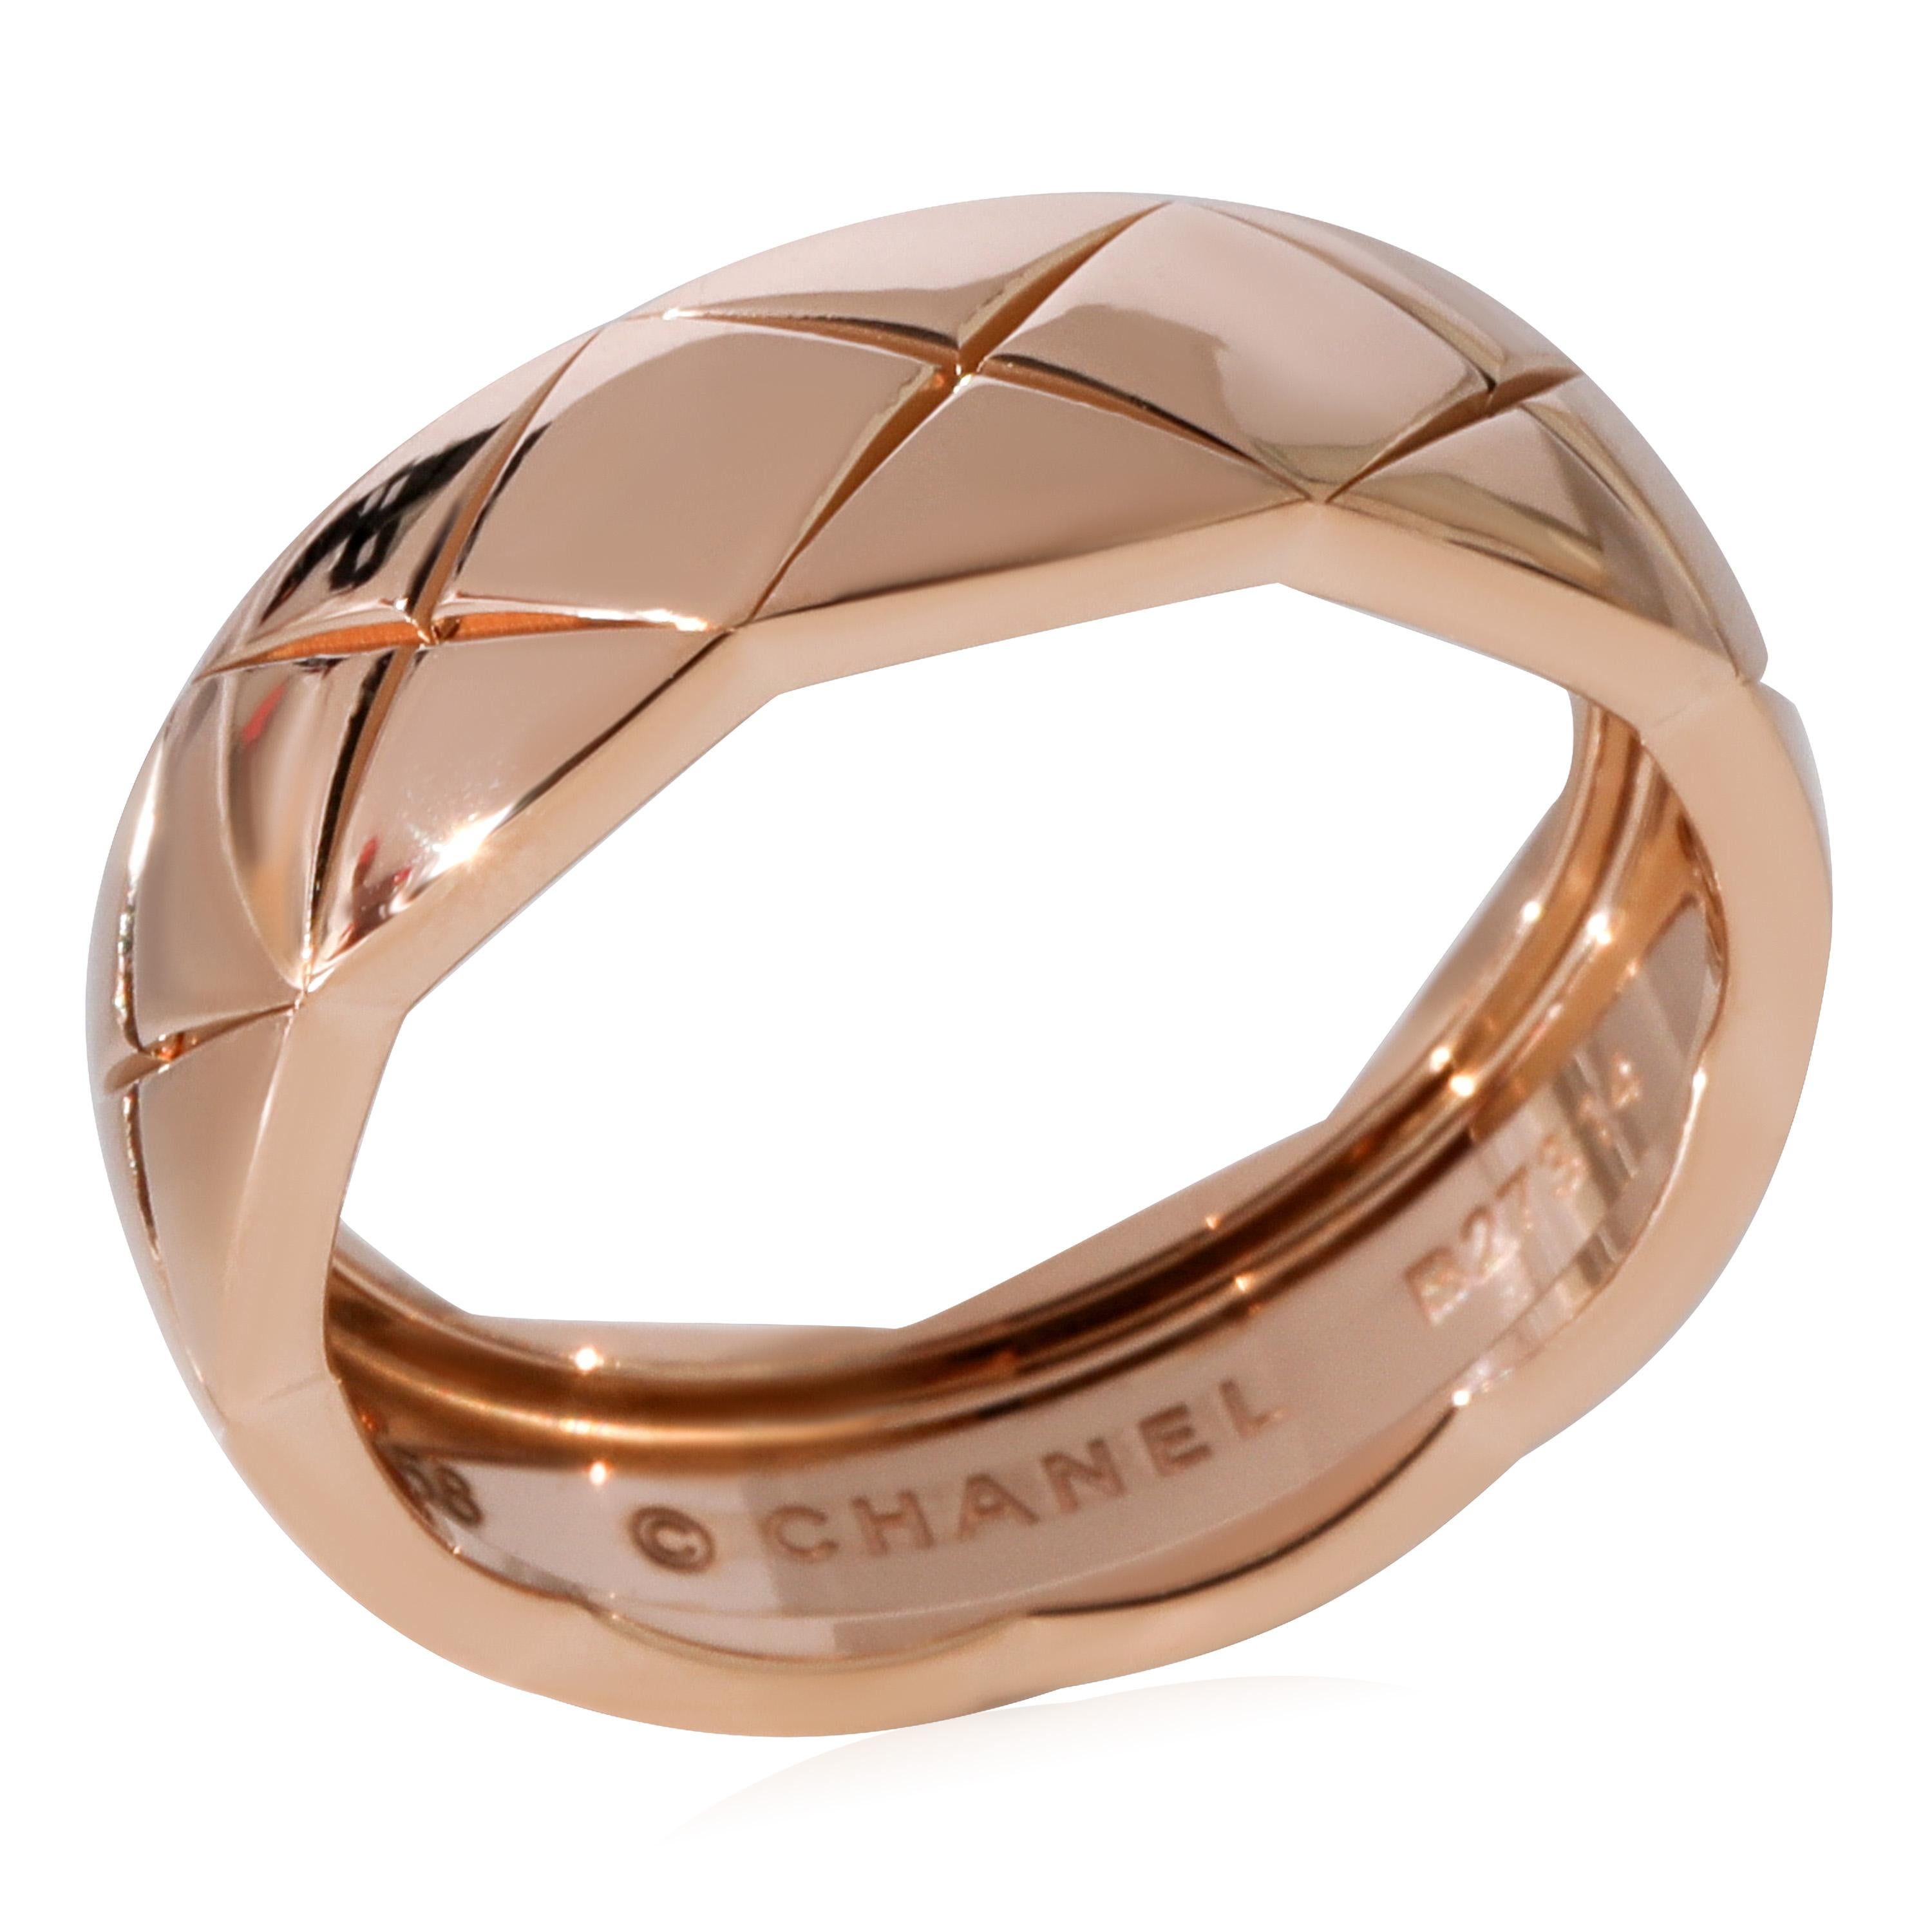 Chanel Coco Crush Ring in 18k Rose Gold, Small Version

PRIMARY DETAILS
SKU: 123661
Listing Title: Chanel Coco Crush Ring in 18k Rose Gold, Small Version
Condition Description: Retails for 2650 USD. In excellent condition and recently polished. Ring